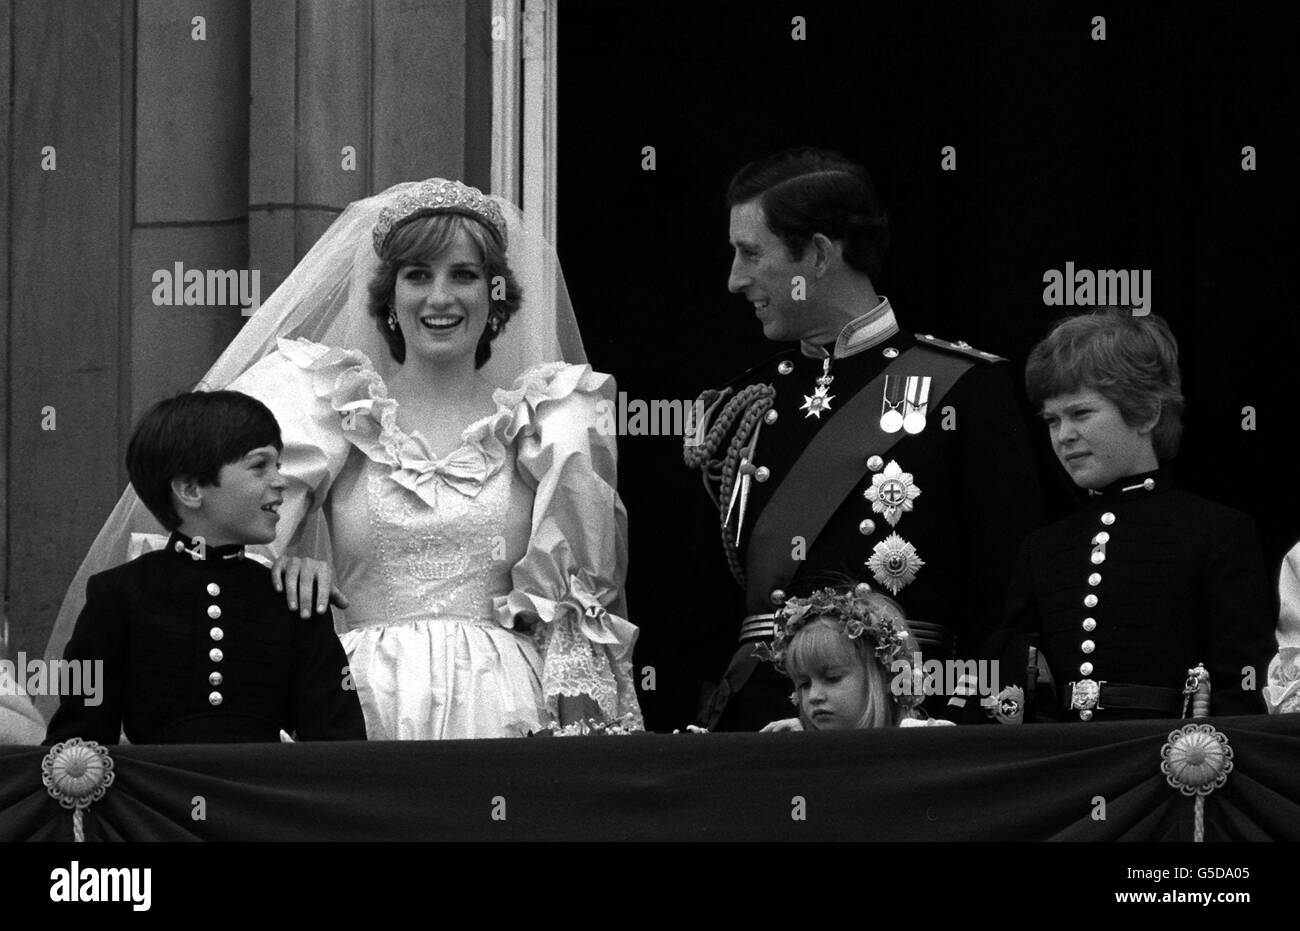 On the balcony, Buckingham Palace, the Princess of Wales laughs as she places her hand on the shoulder of Edward Van Cutsem, one of the Page boys at her wedding to the Prince of Wales. Also visible are Clementine Hambro (a bridesmaid) and Nicholas Windsor (Page Boy). Stock Photo